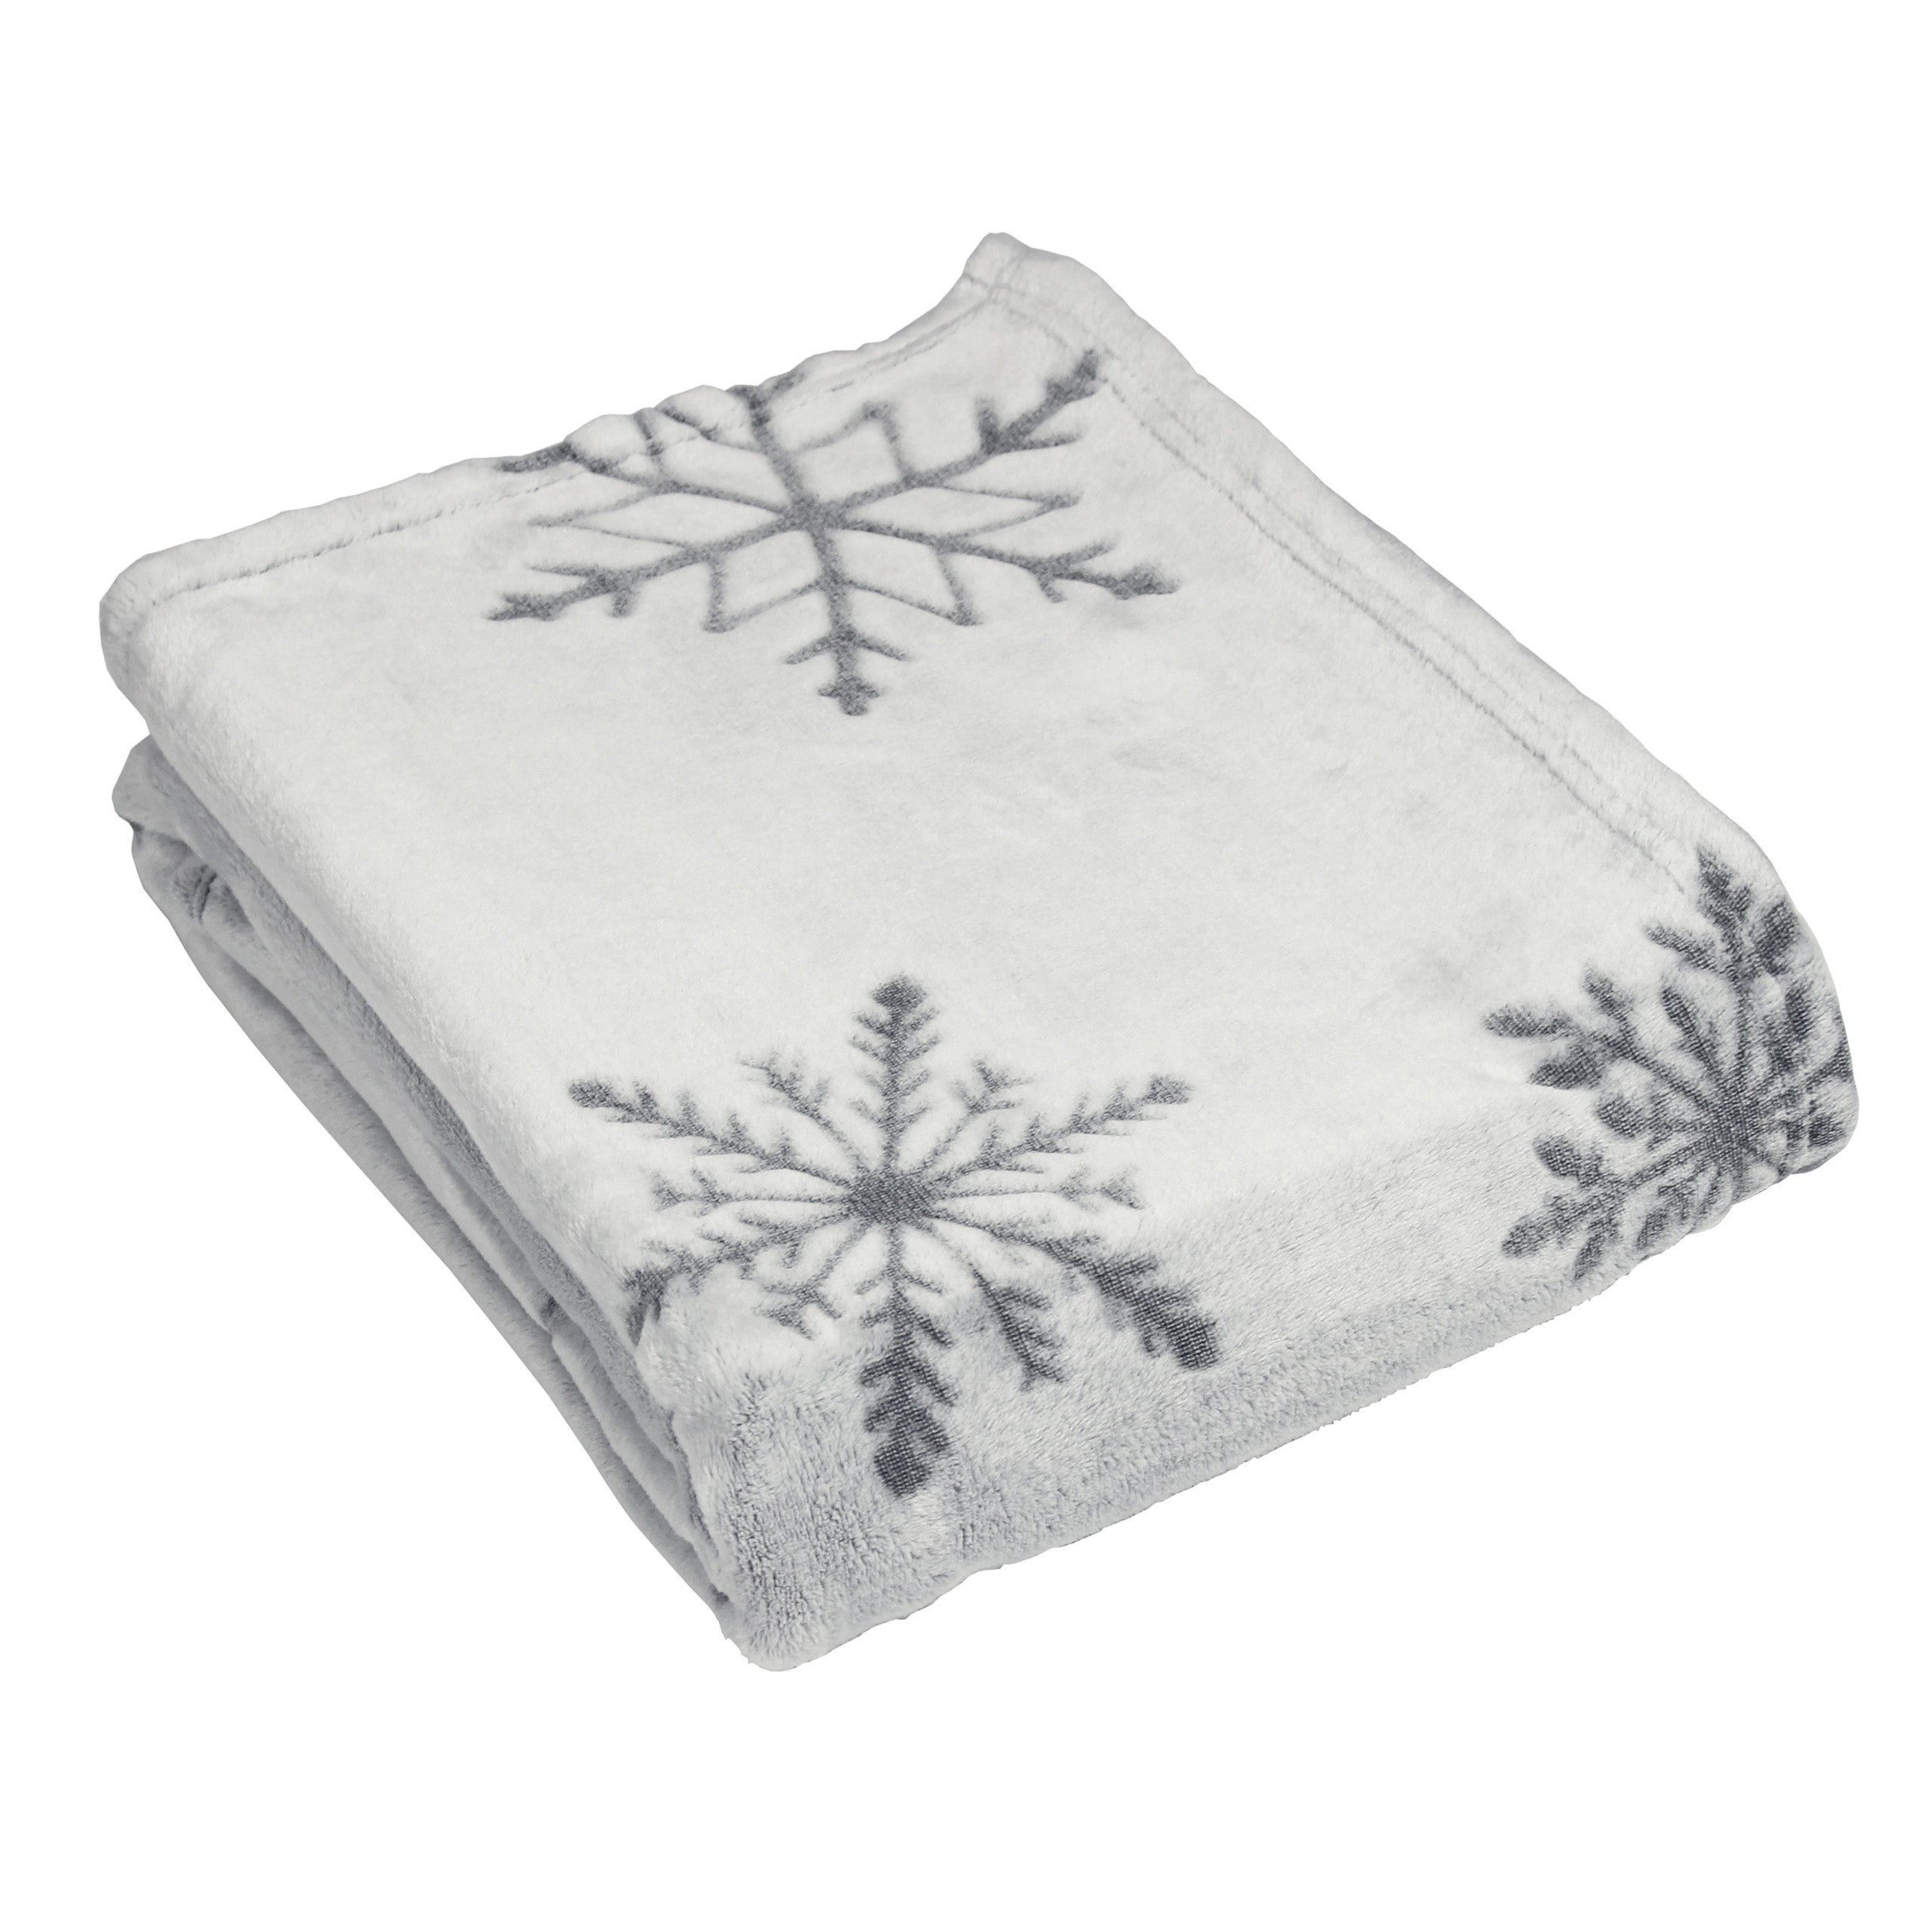 SALE NOW ON - Throws & Blankets | Dunelm | Page 4